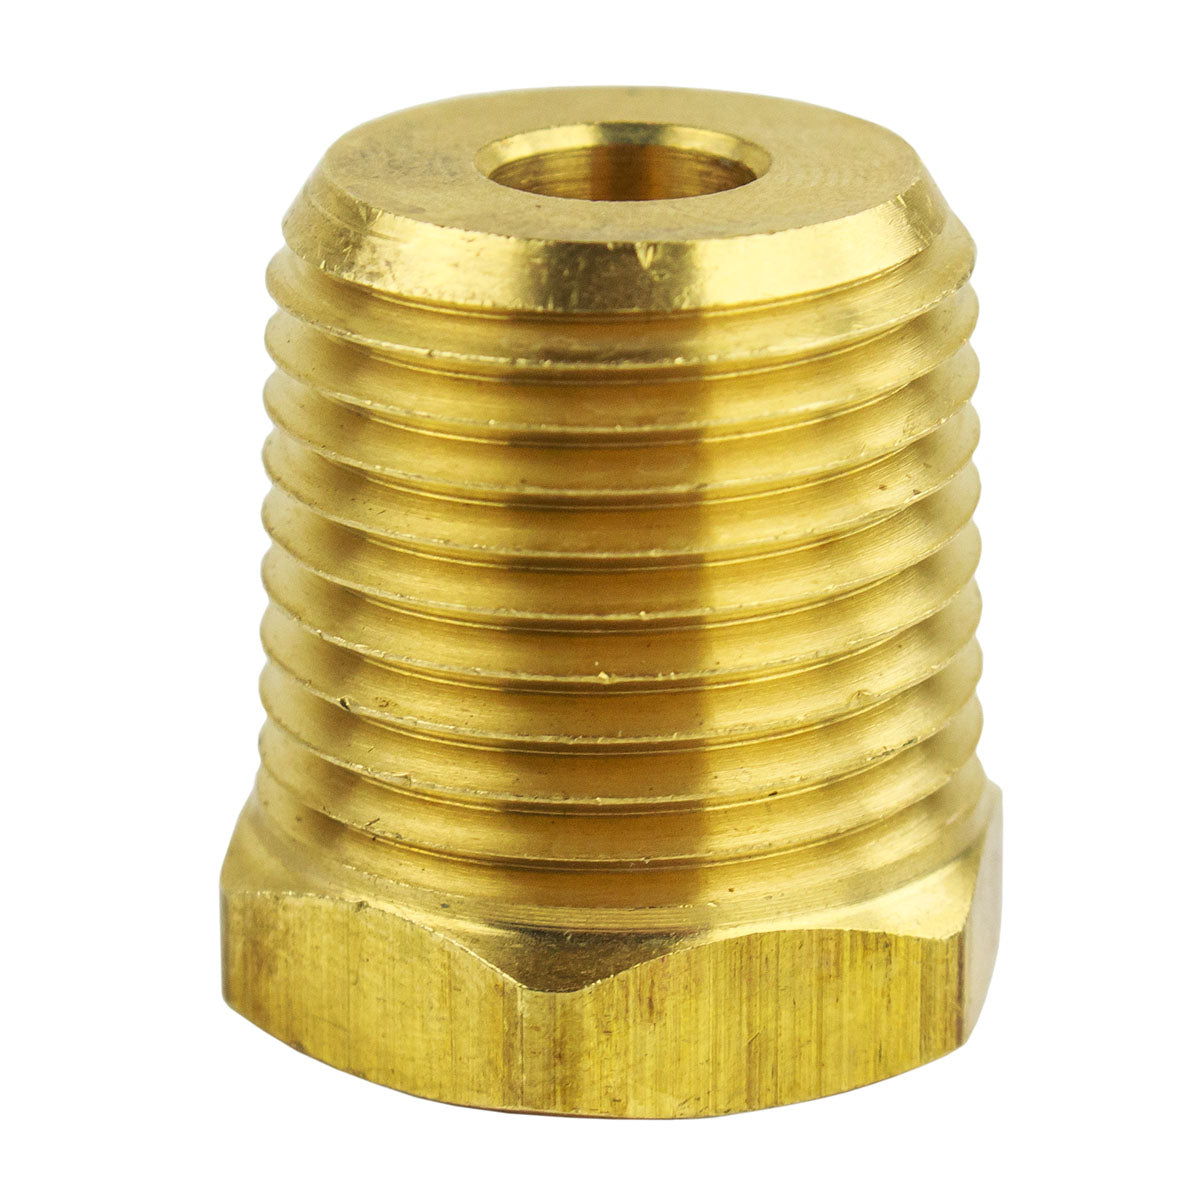 1/2" MNPT x 1/4" FNPT Solid Brass Bushings Reducer Fitting Adapter 28106 5-Pack